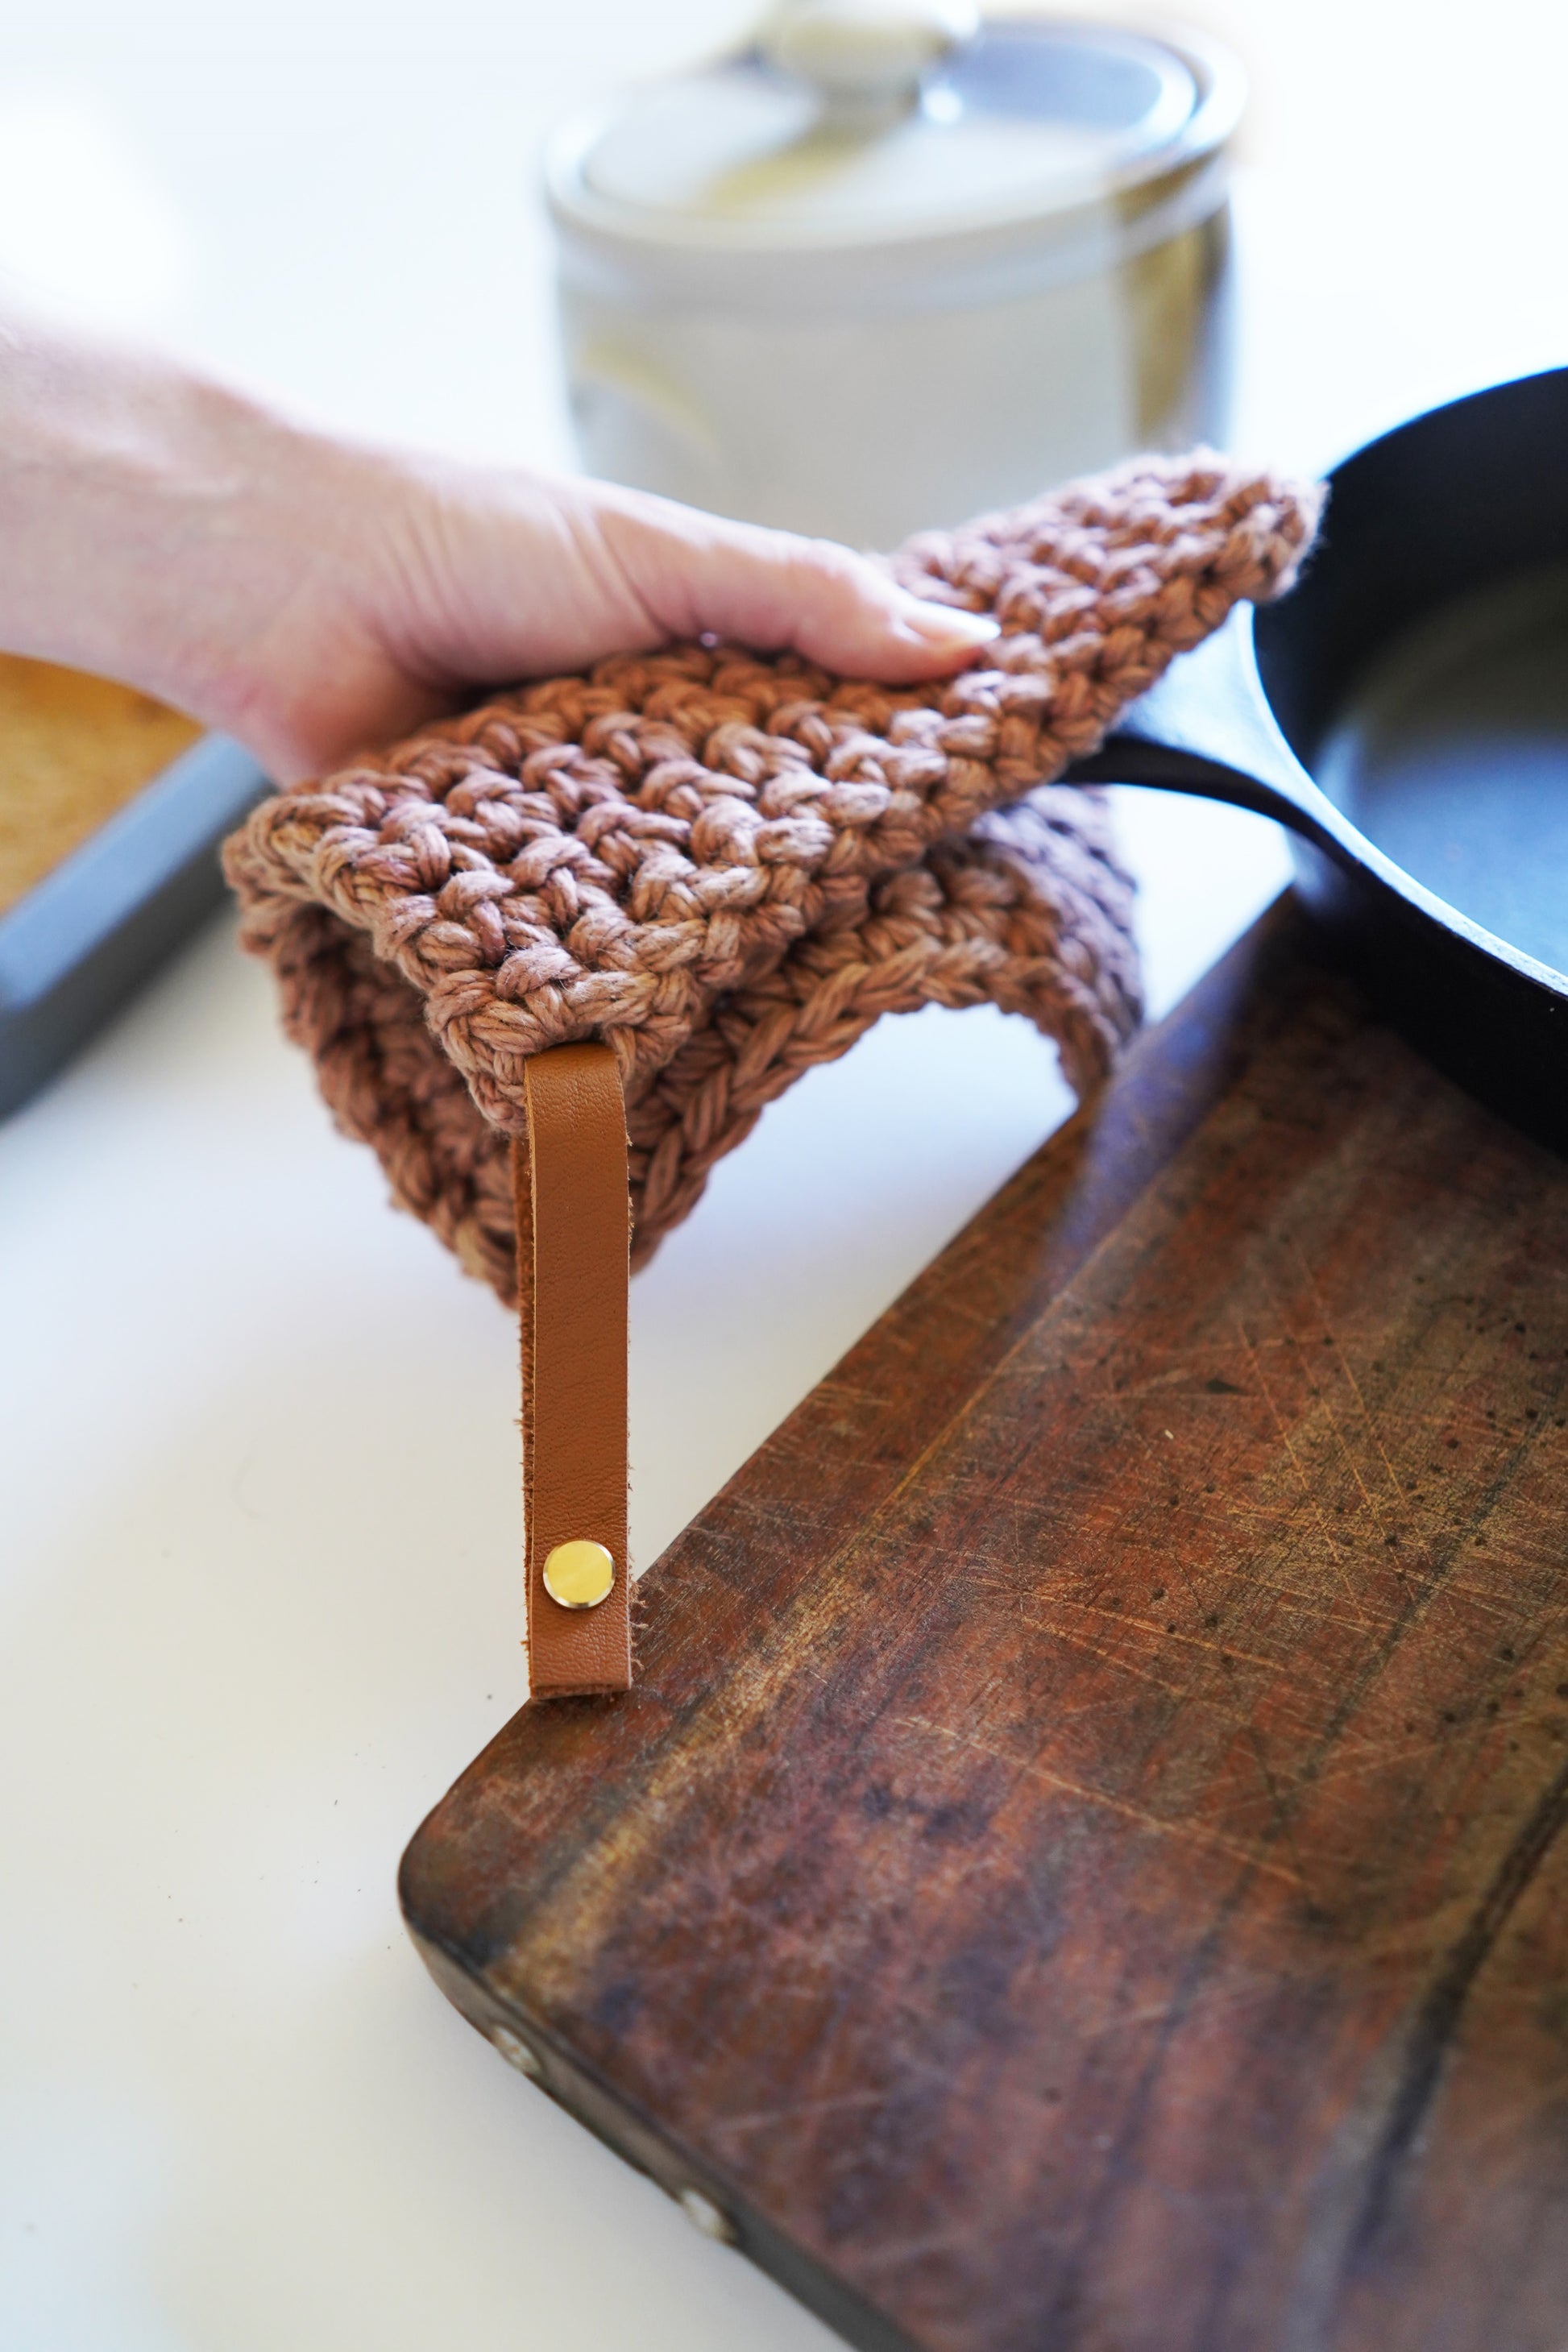 Cast Iron Skillet Handle and Hand knit Hot Pad Gift Pack